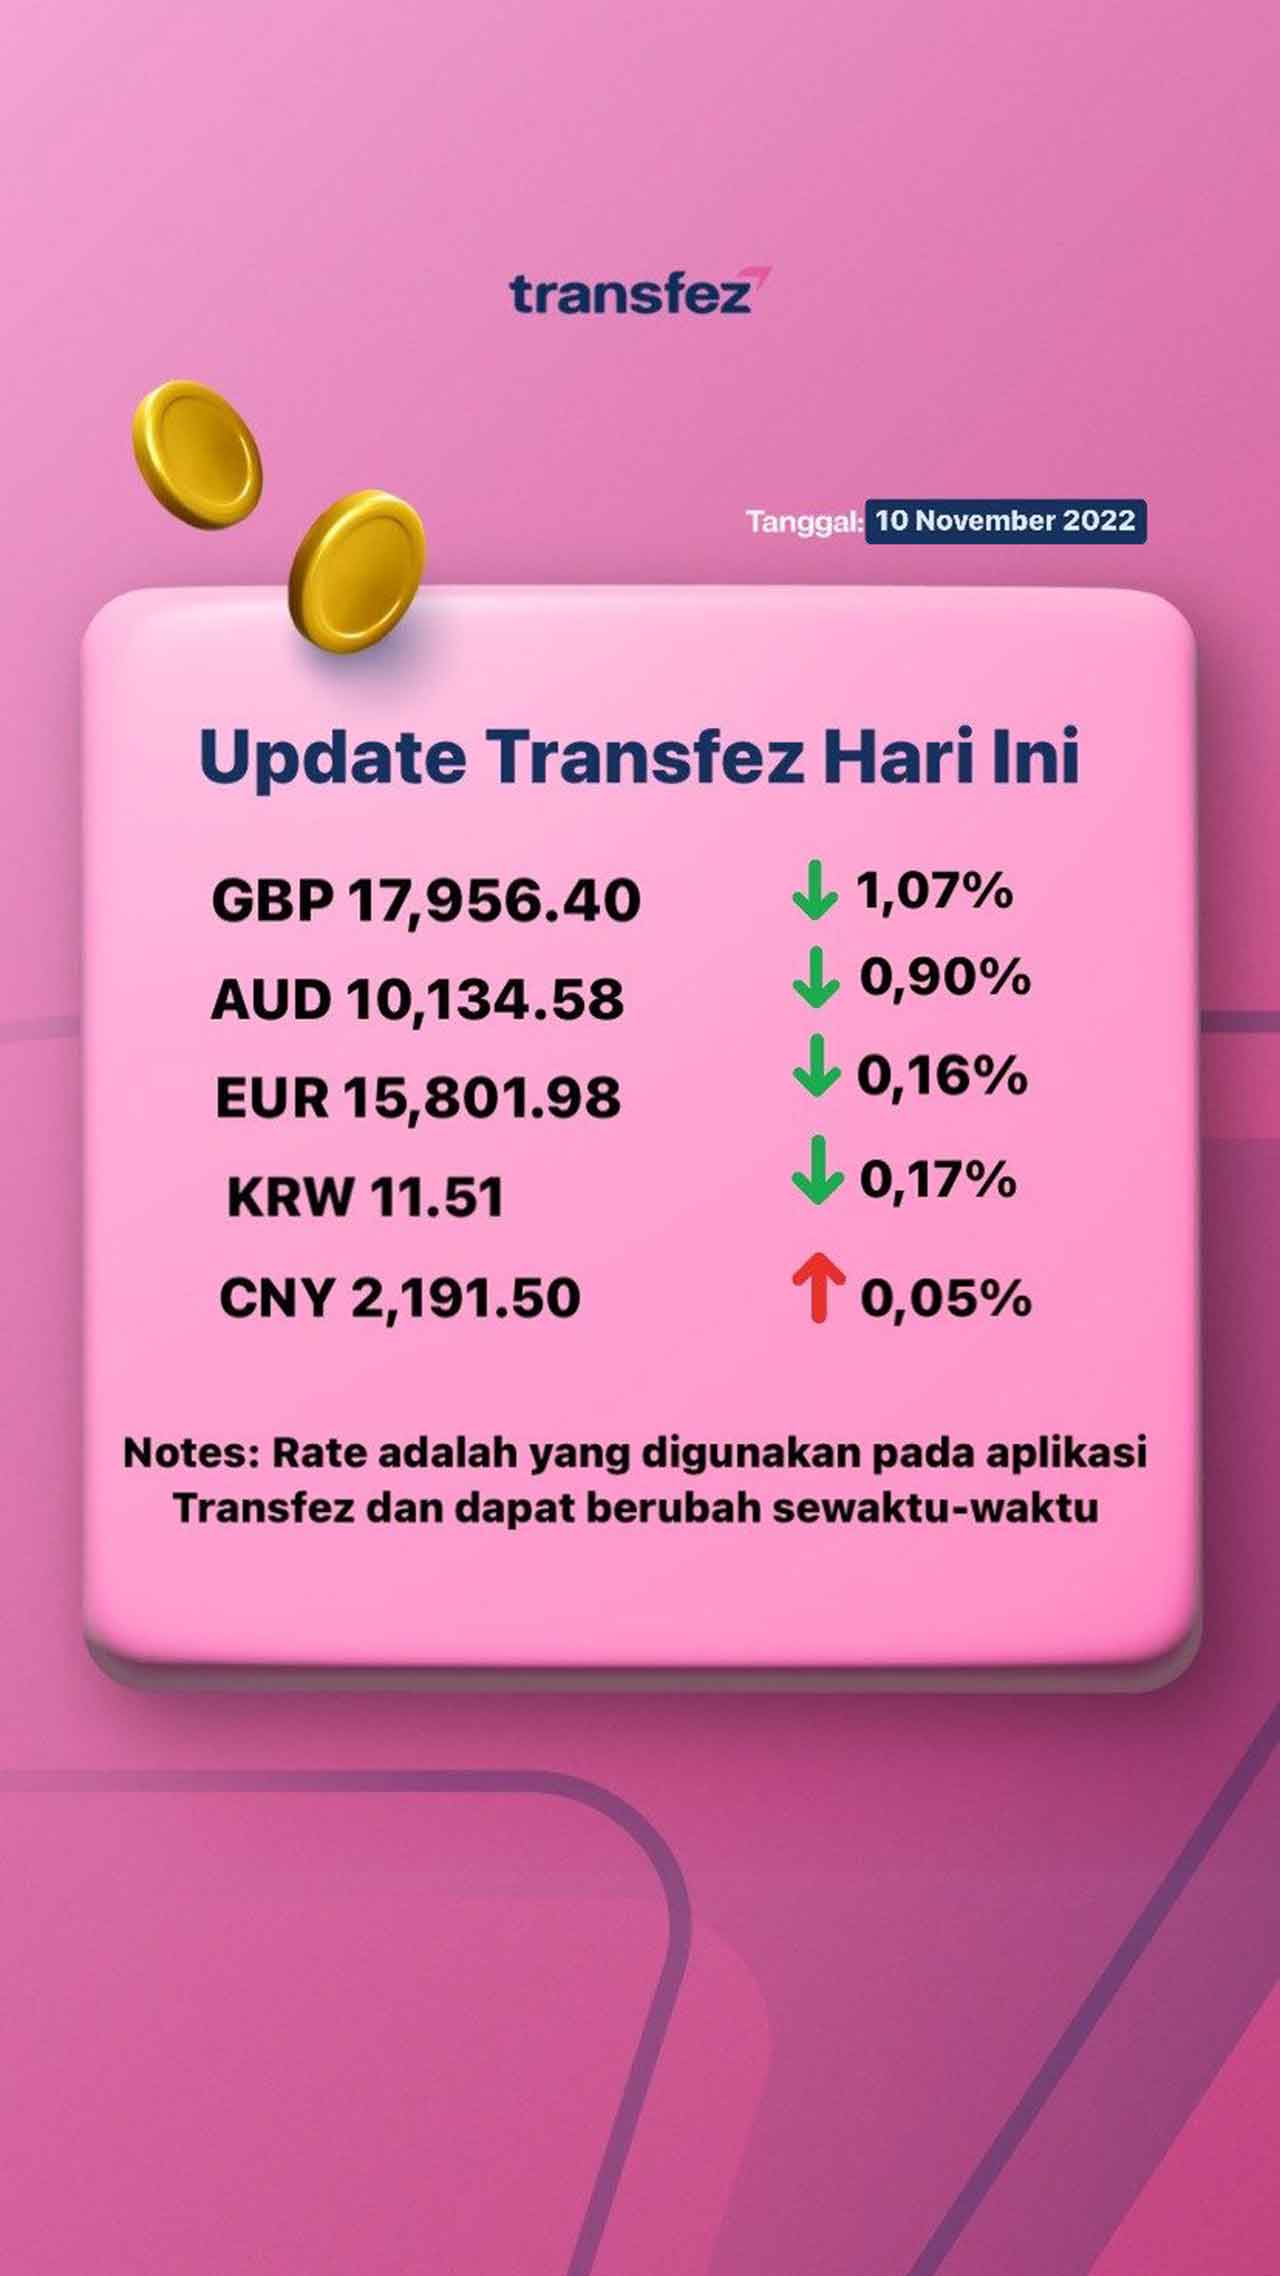 Today's Transfez Rate Update 10 November 2022